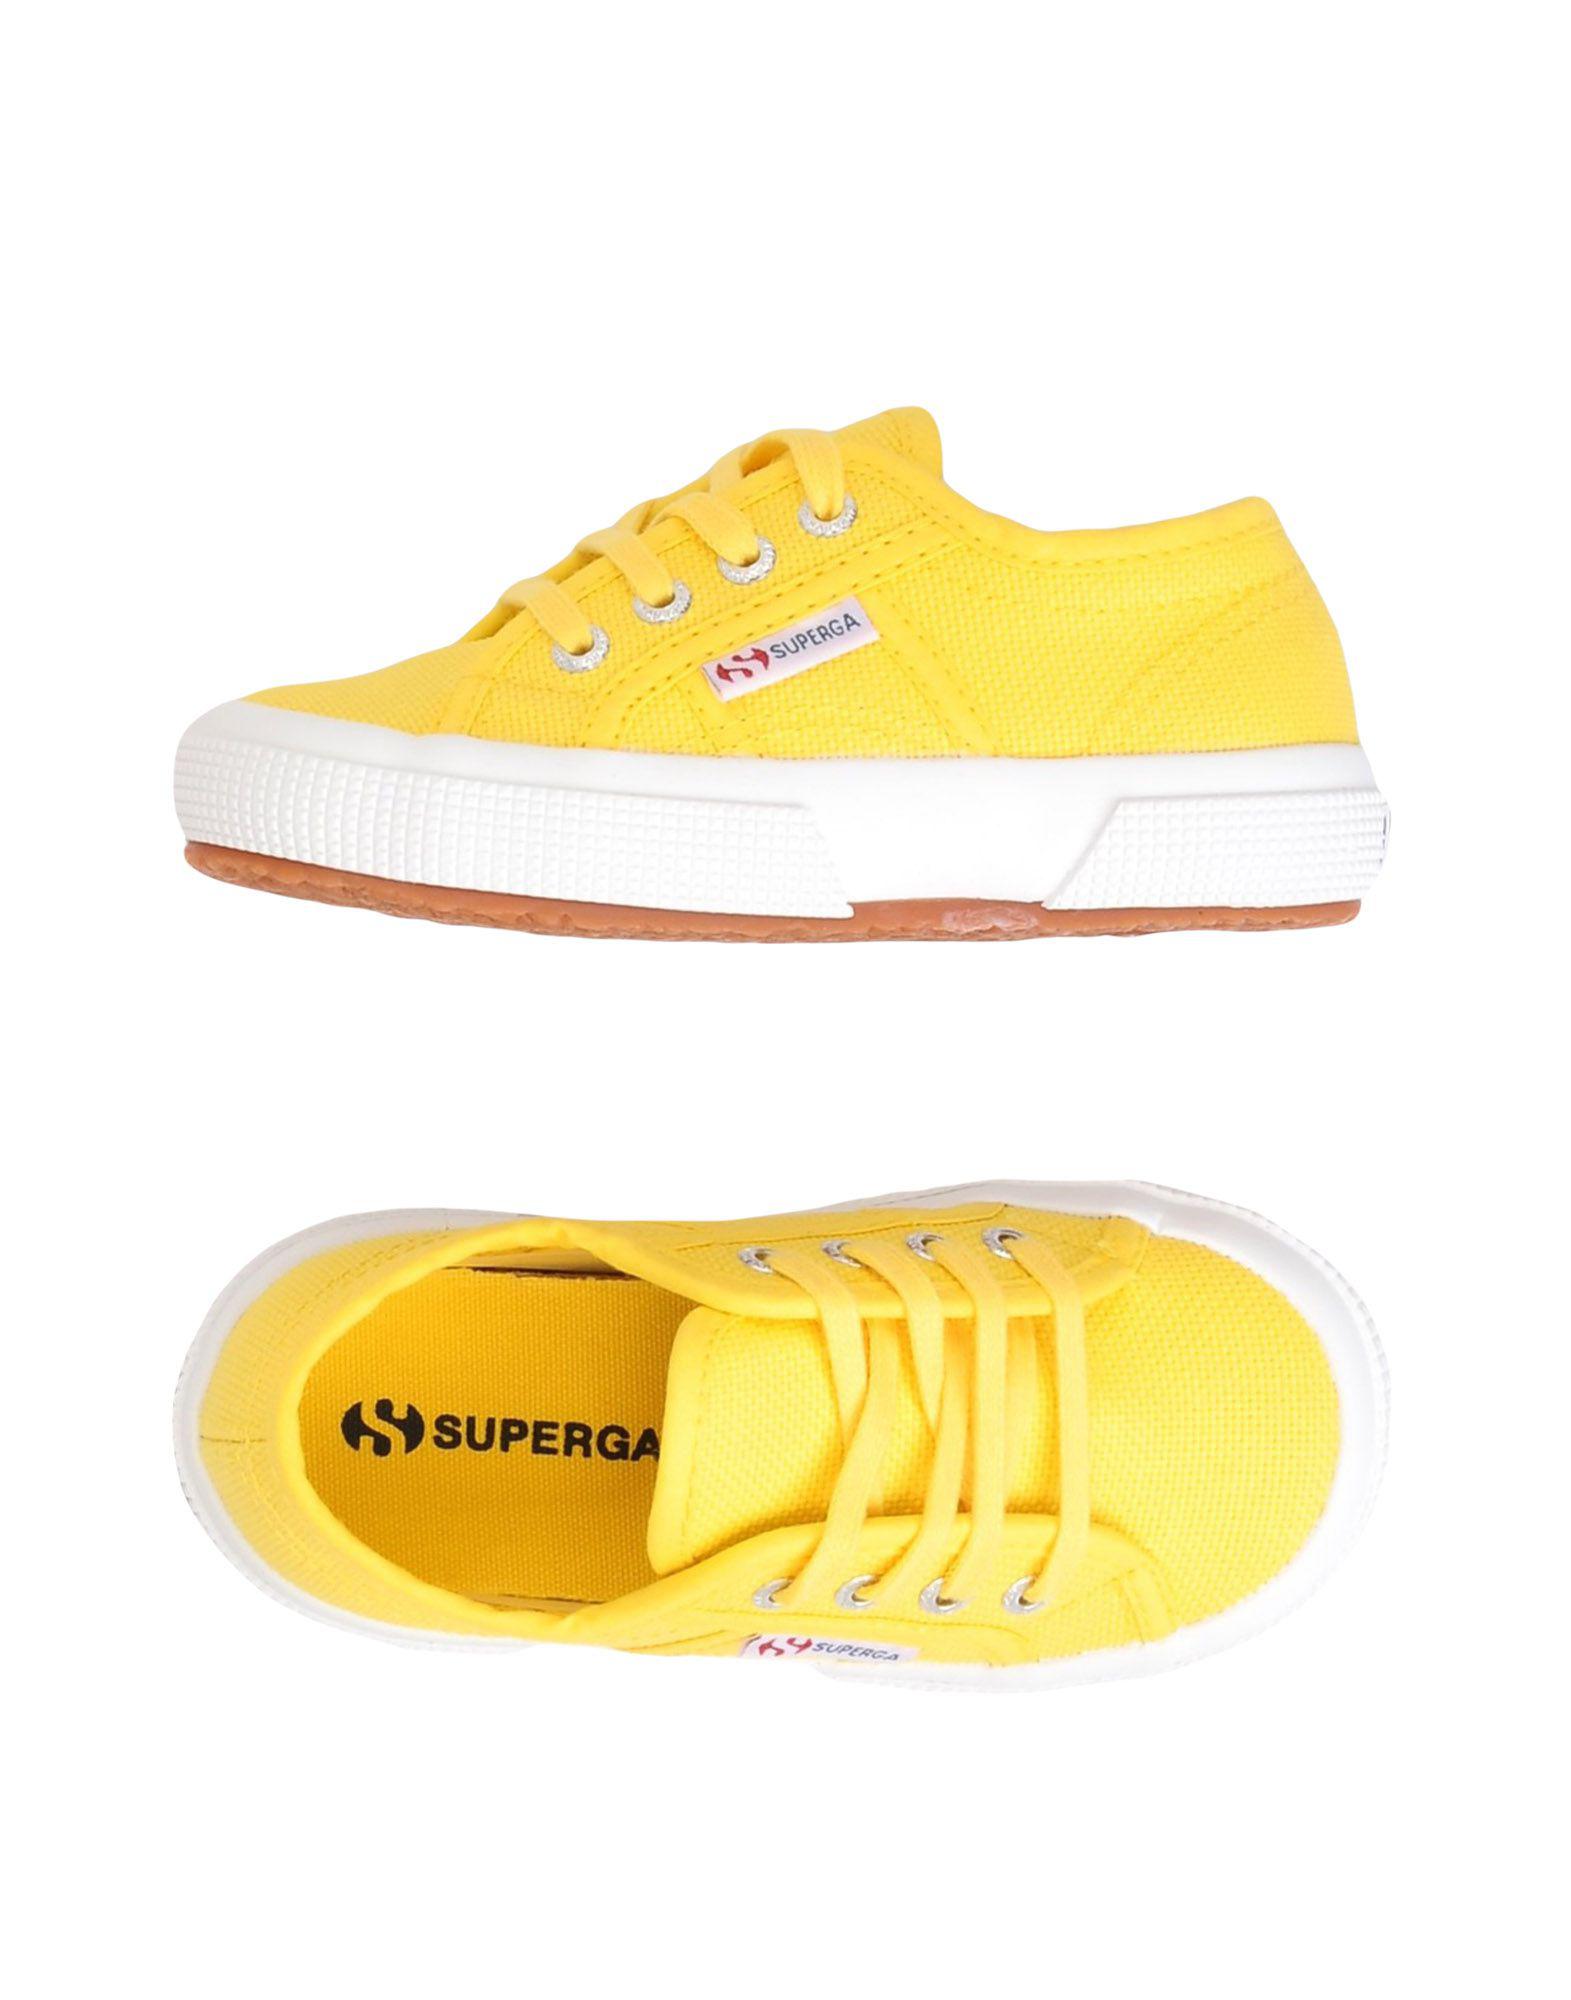 Superga Canvas Low-tops & Sneakers in Yellow - Lyst